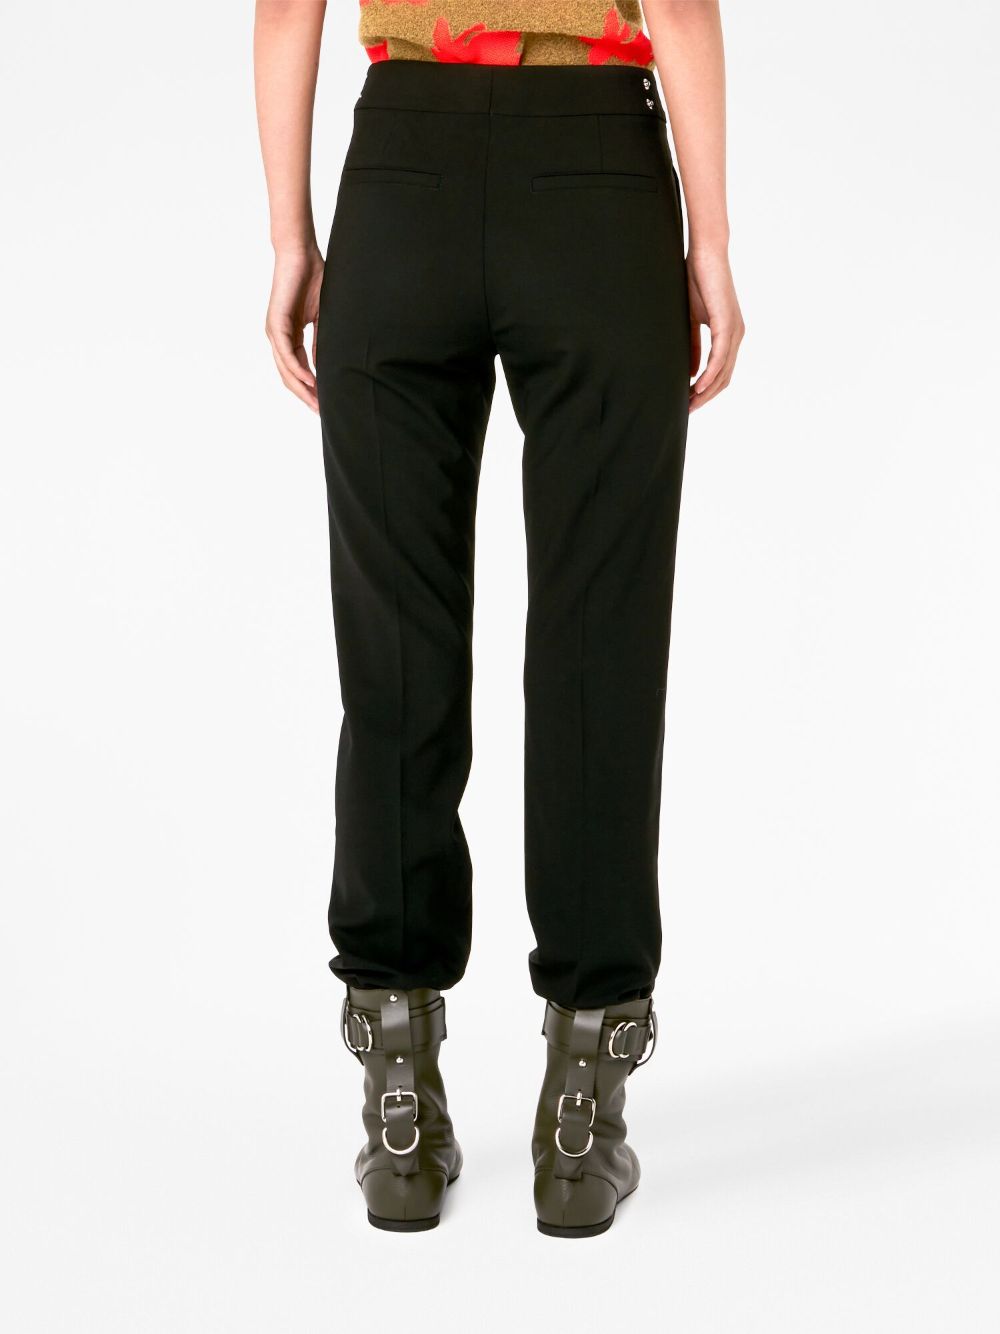 JW ANDERSON Black Legging Pants with Silver Padlock for Women